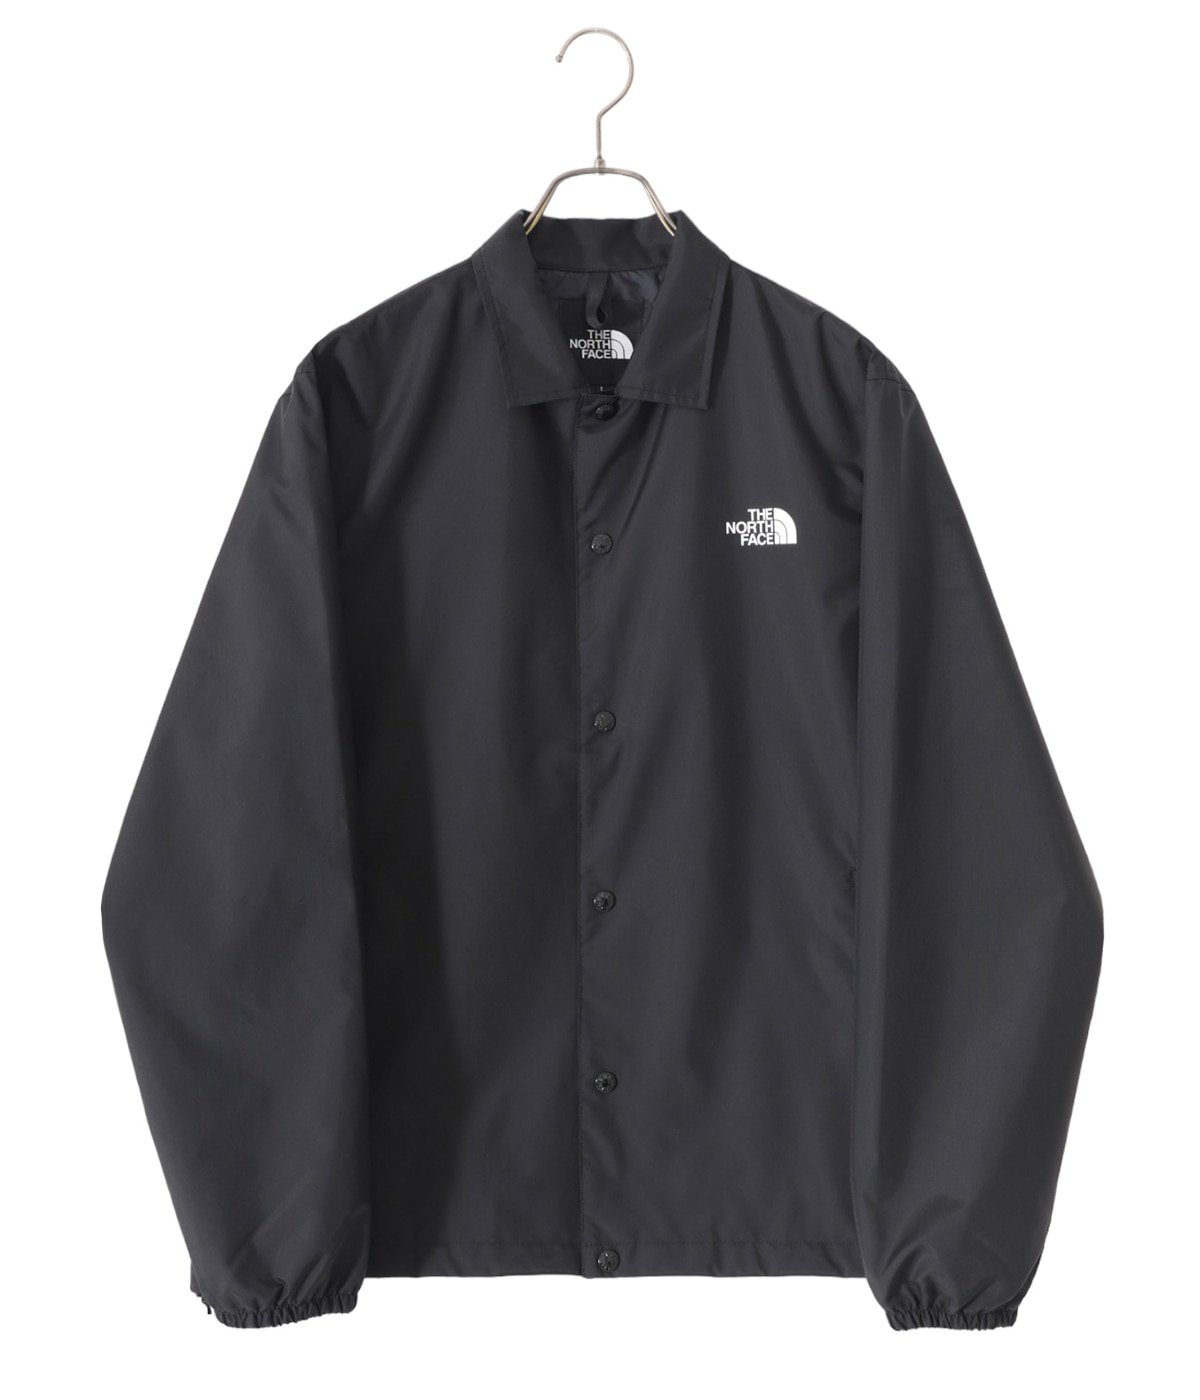 THE NORTH FACE coach jacket